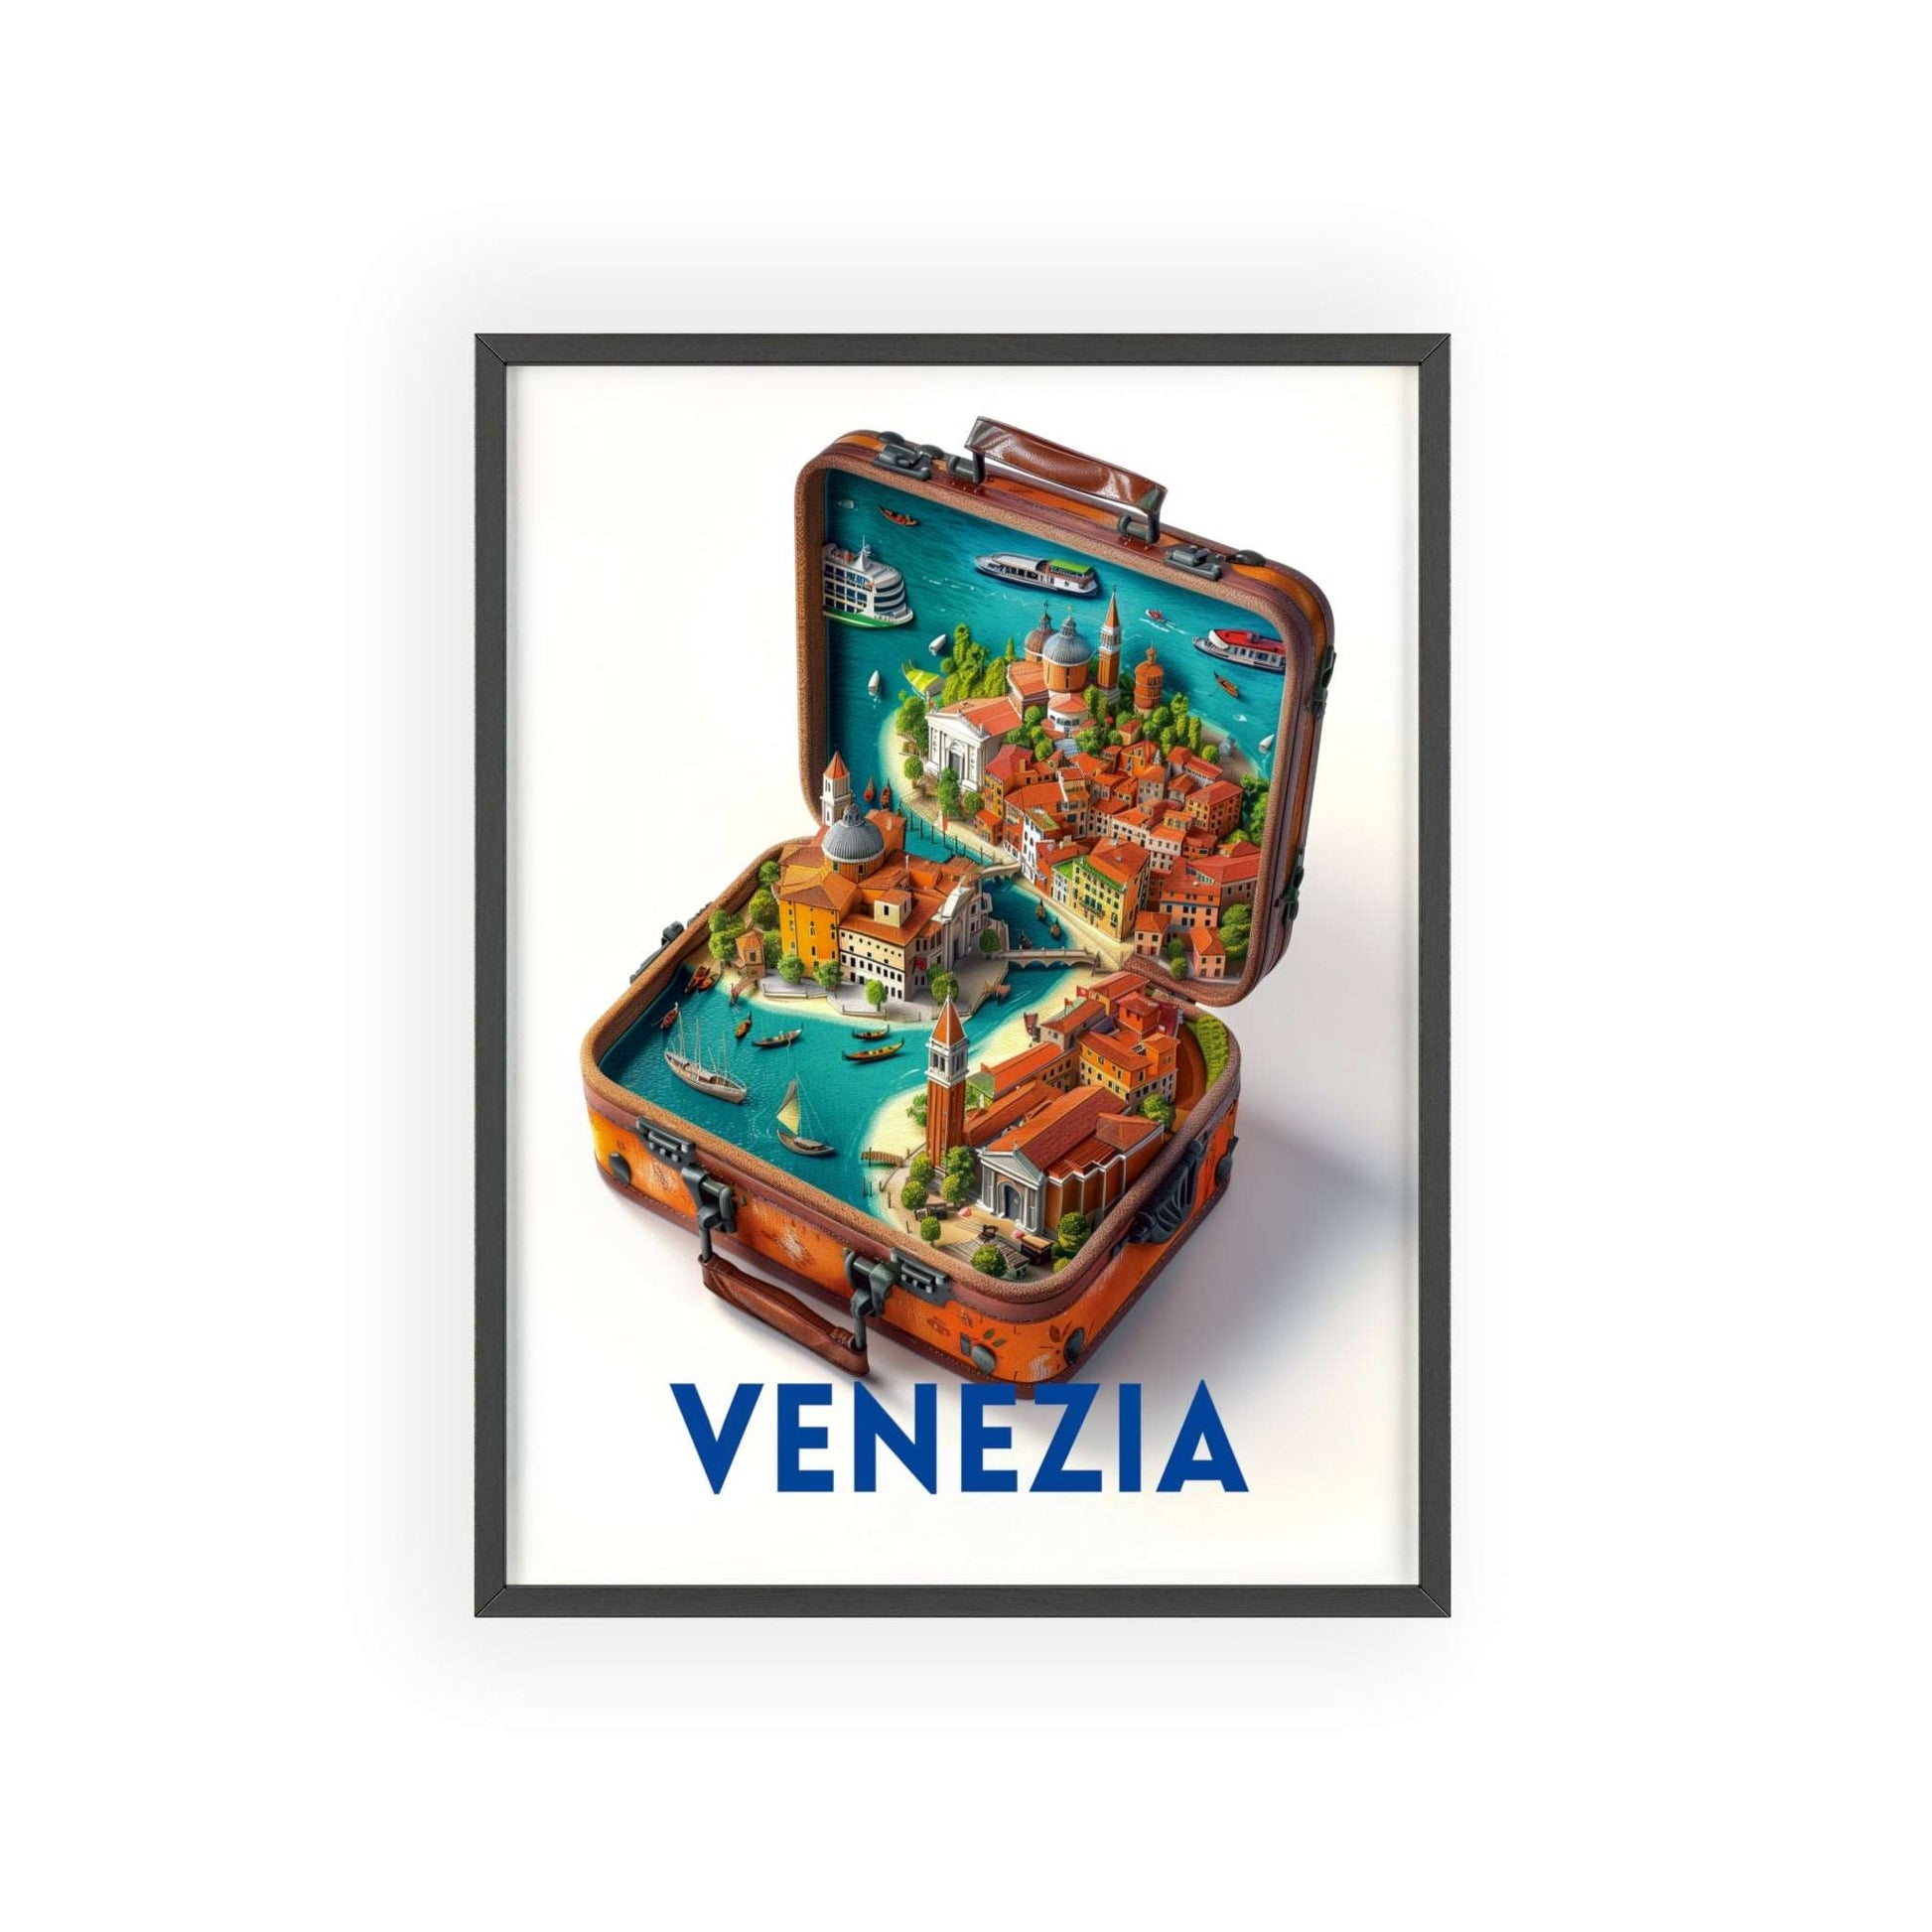 Venice in a Suitcase wall art, a chic travel poster for elegant home decor